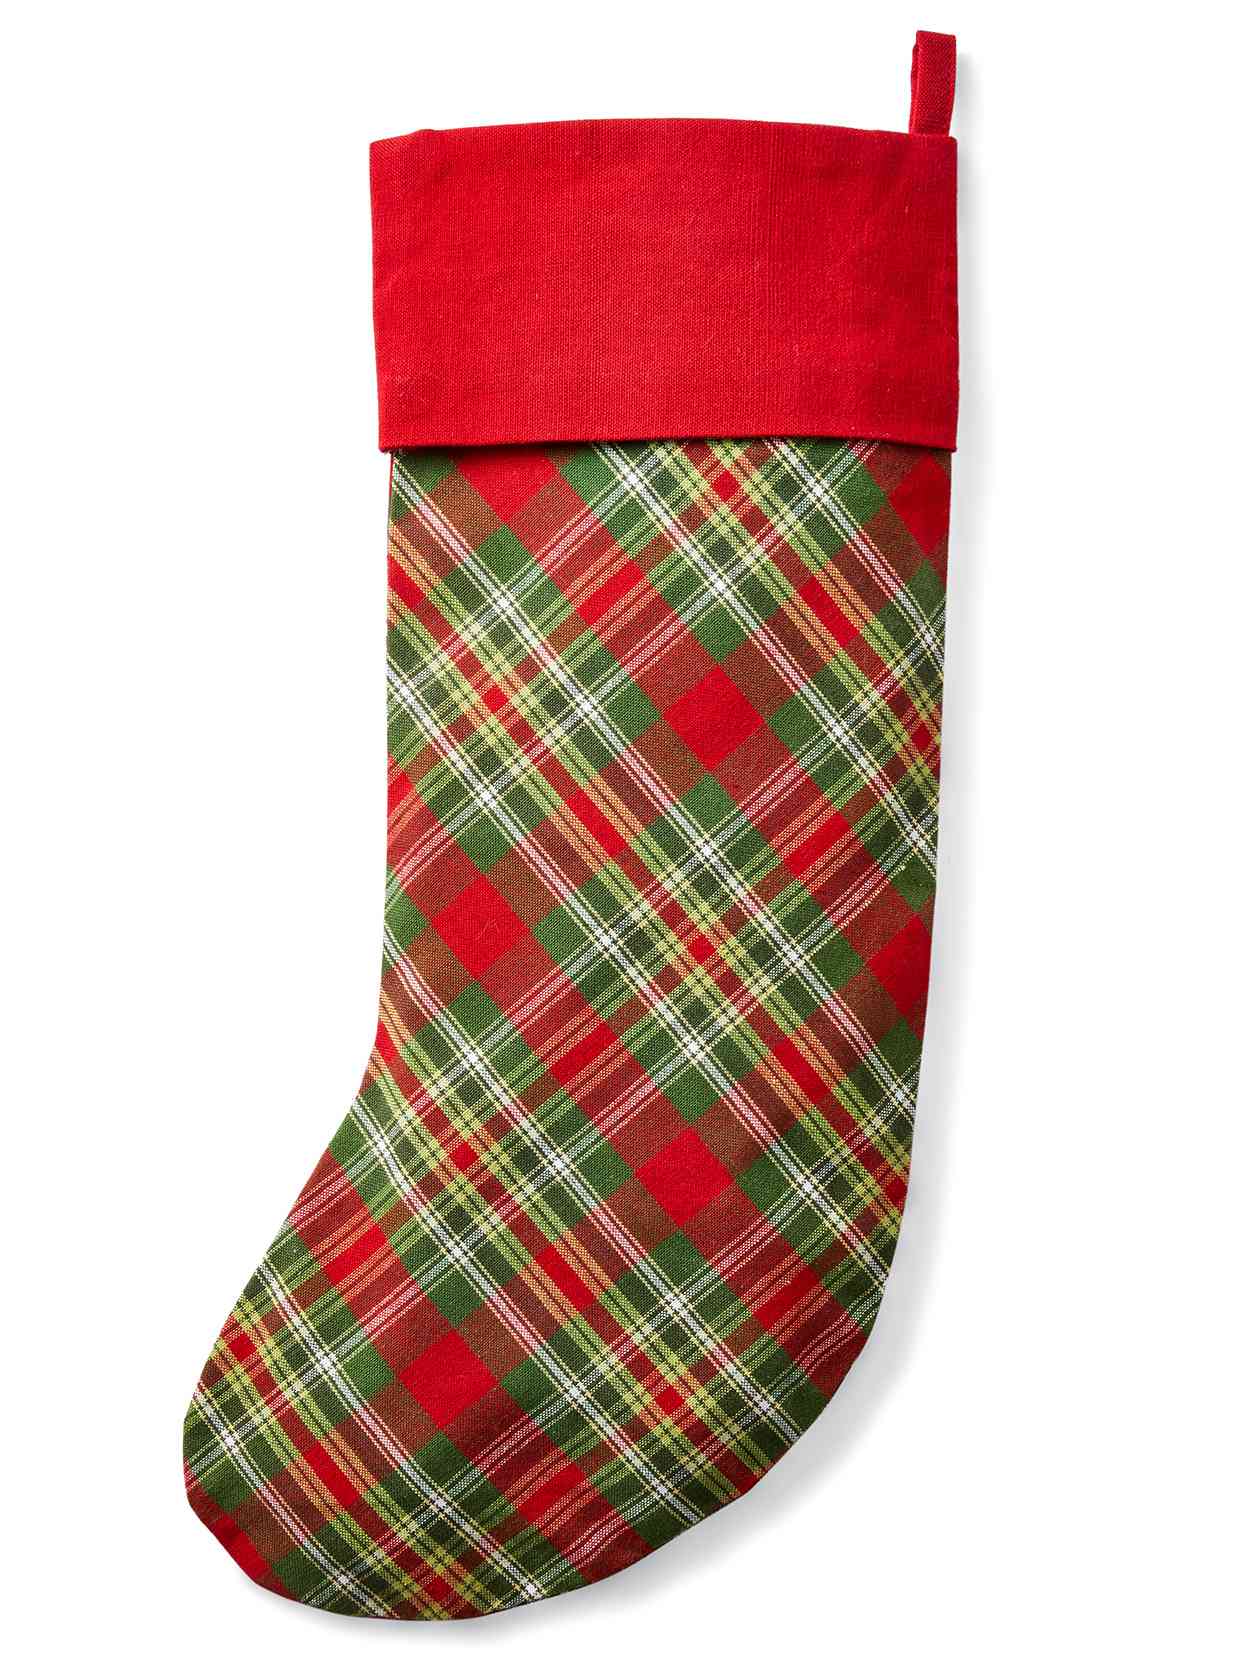 Williamsburg Greenhow red and green Christmas stocking